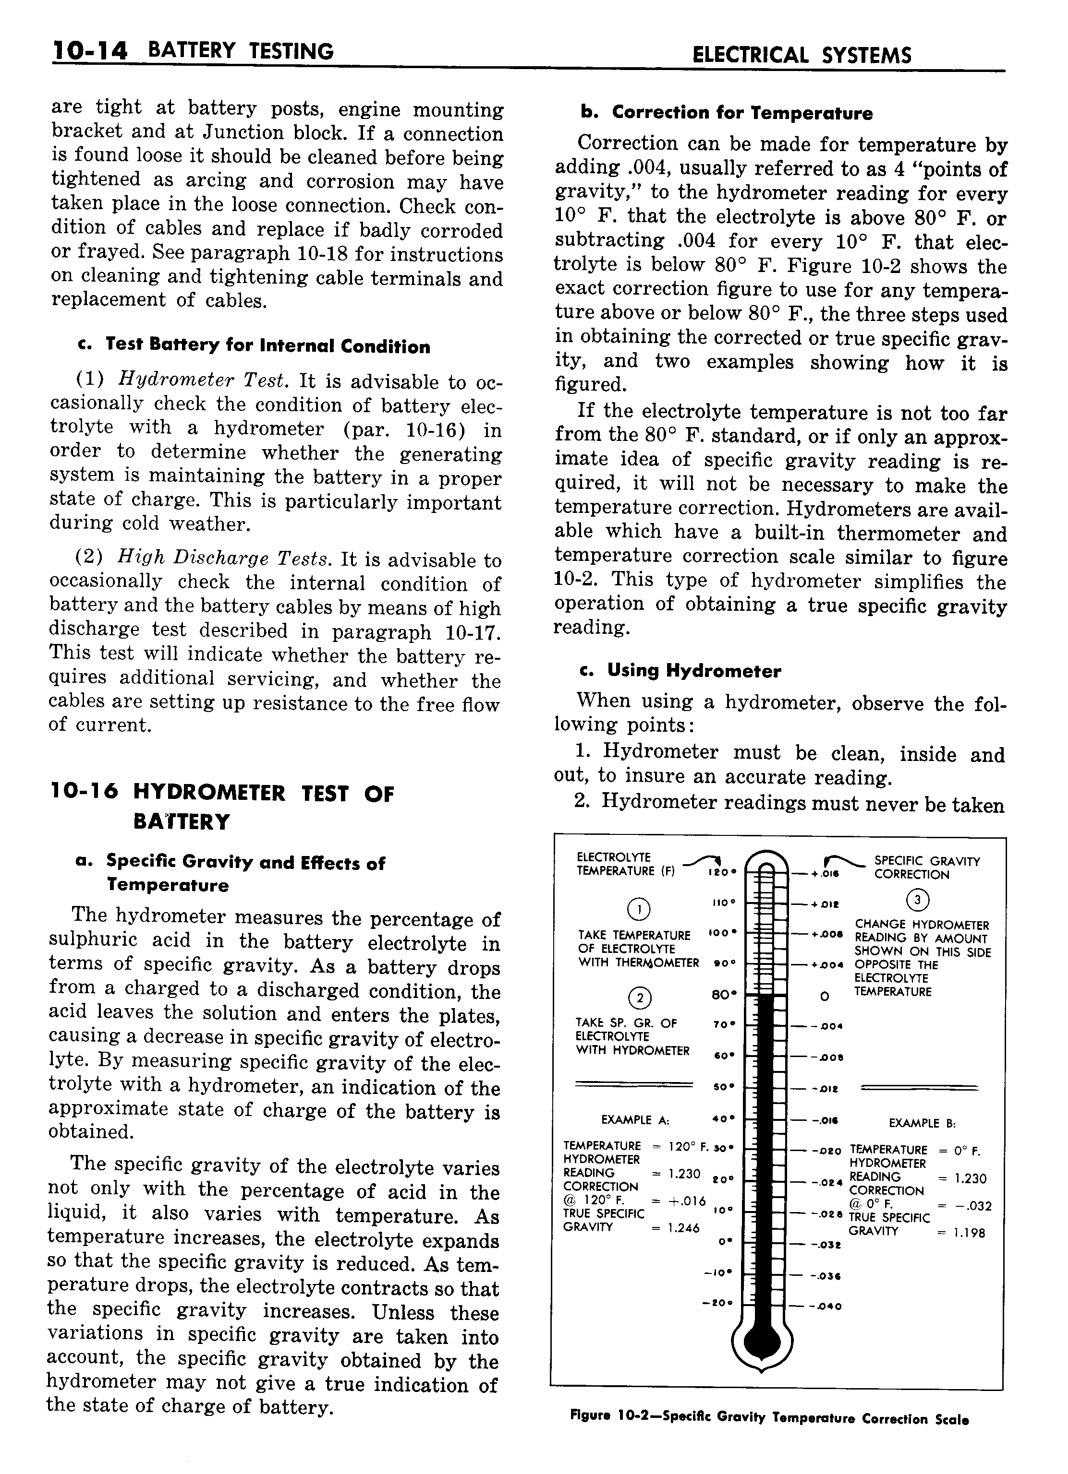 n_11 1957 Buick Shop Manual - Electrical Systems-014-014.jpg